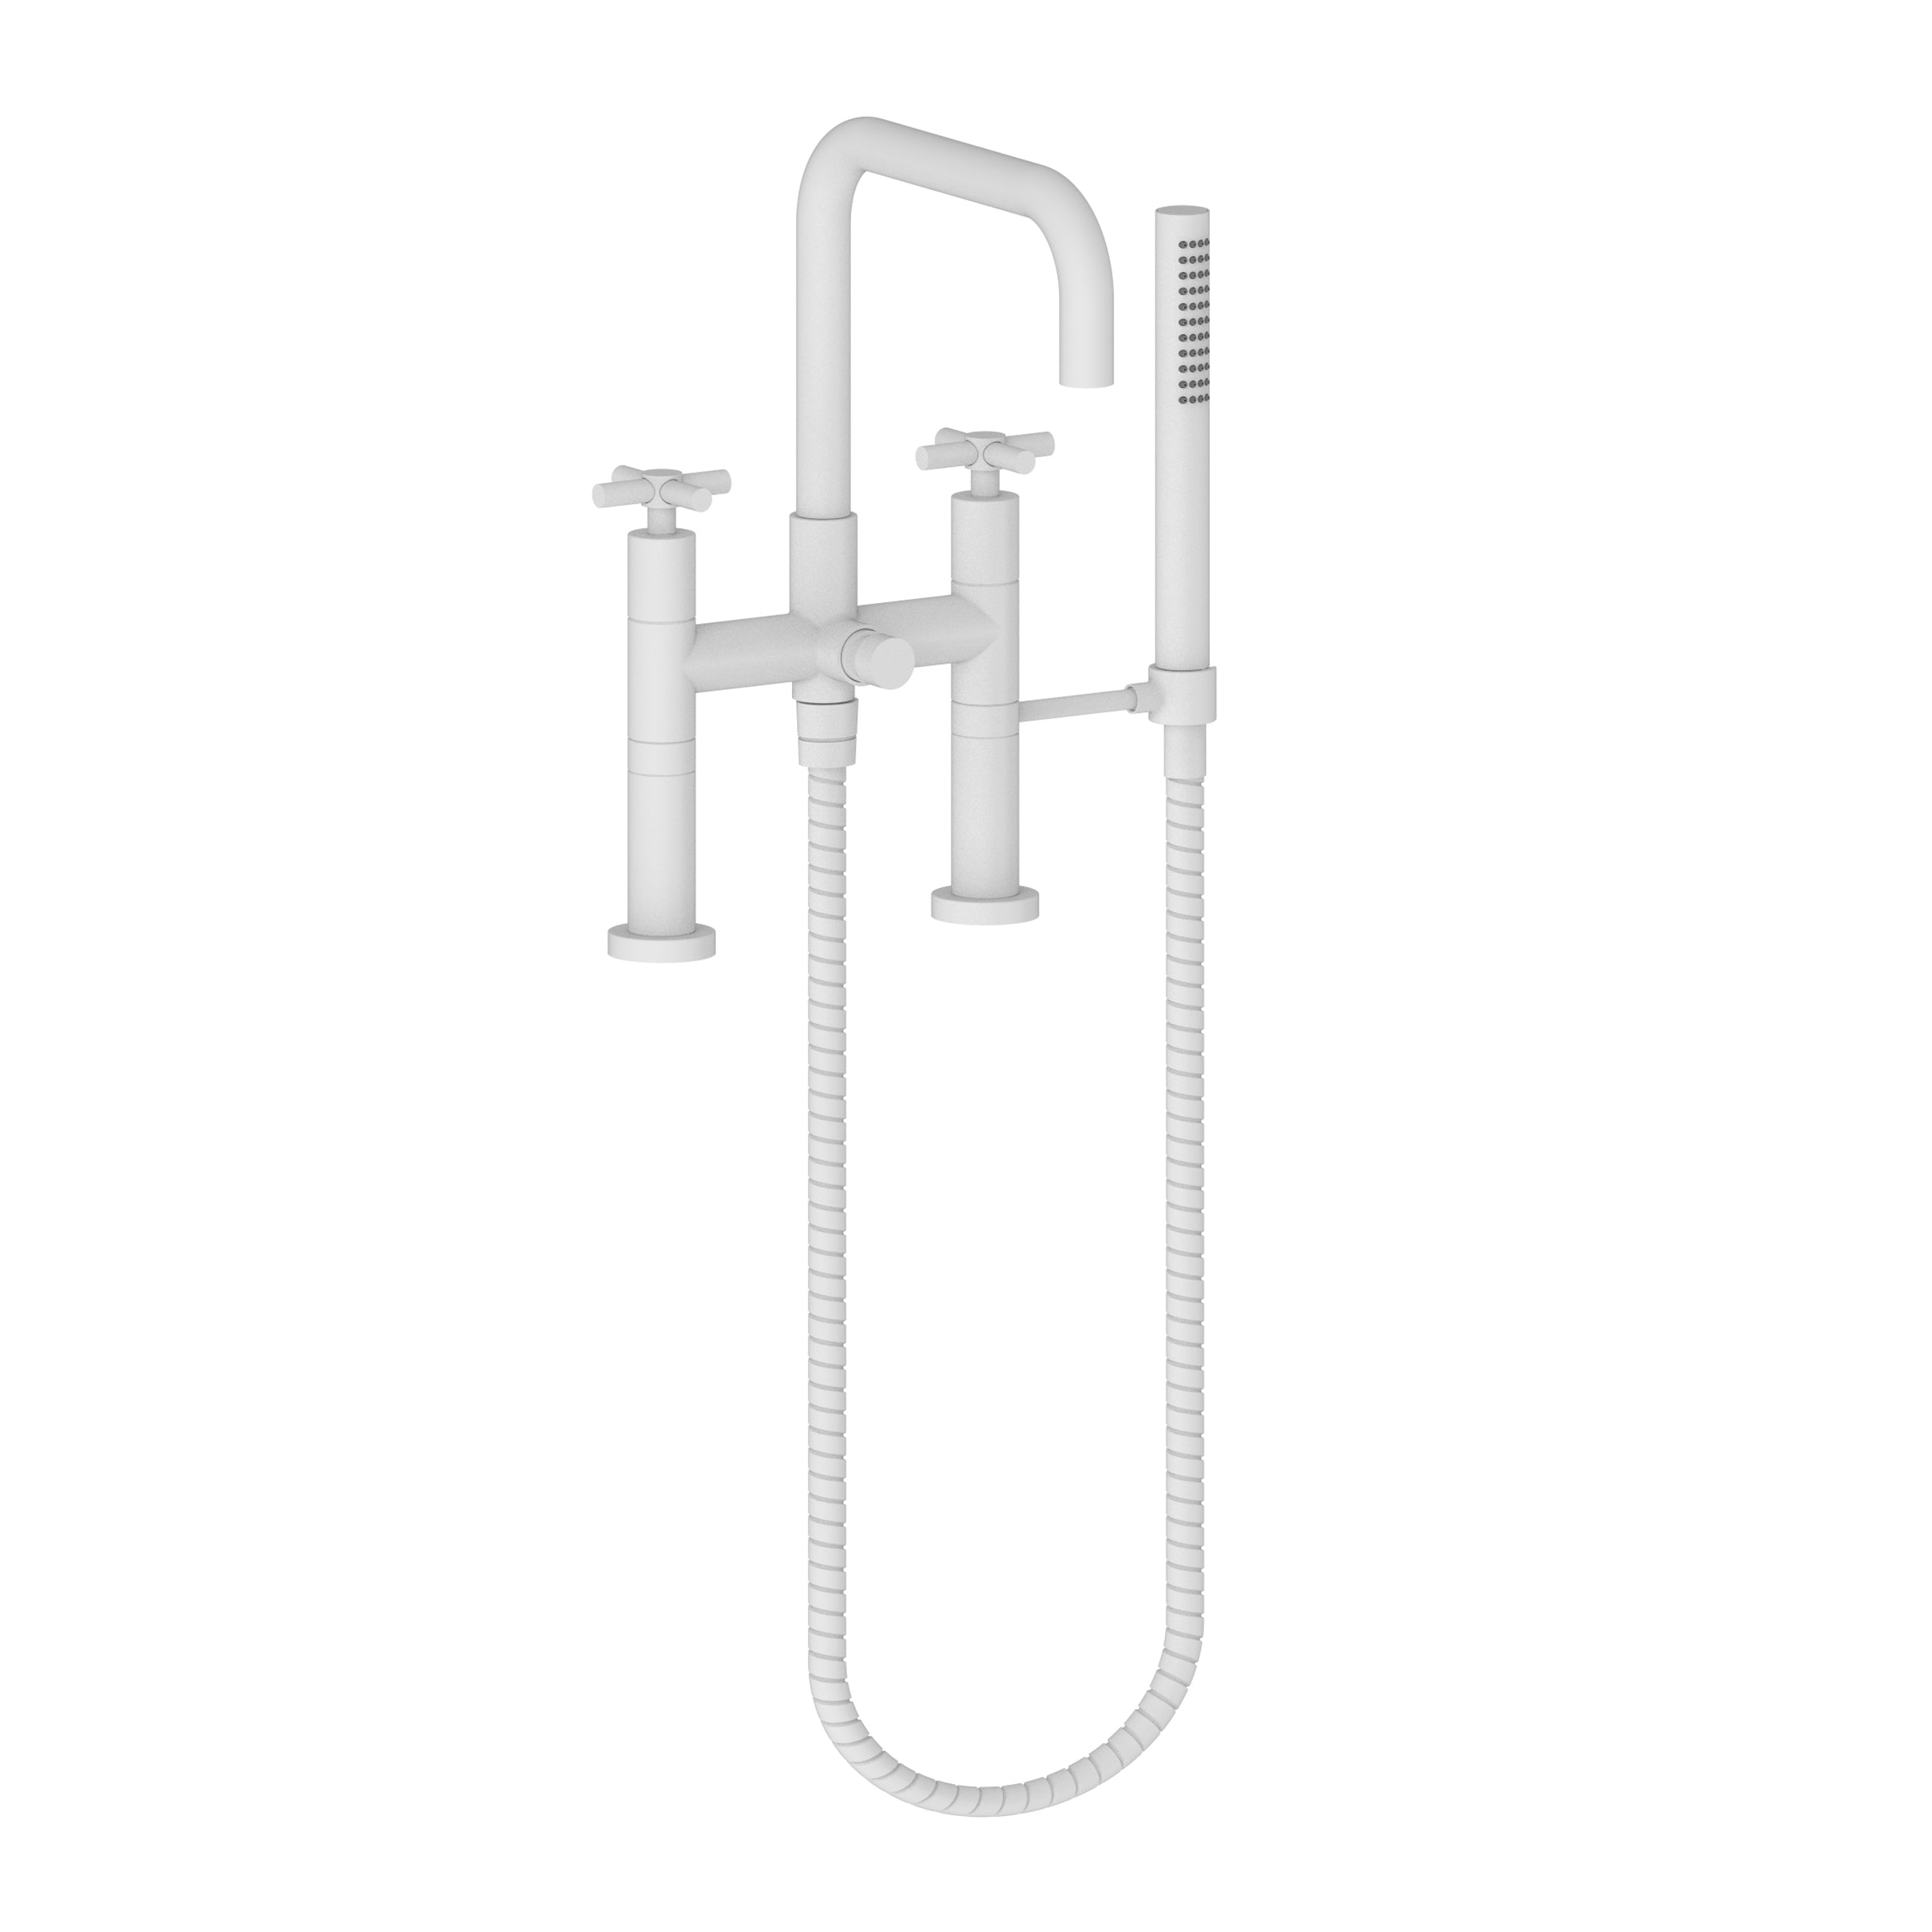 Newport Brass East Square Exposed Tub & Hand Shower Set - Deck Mount